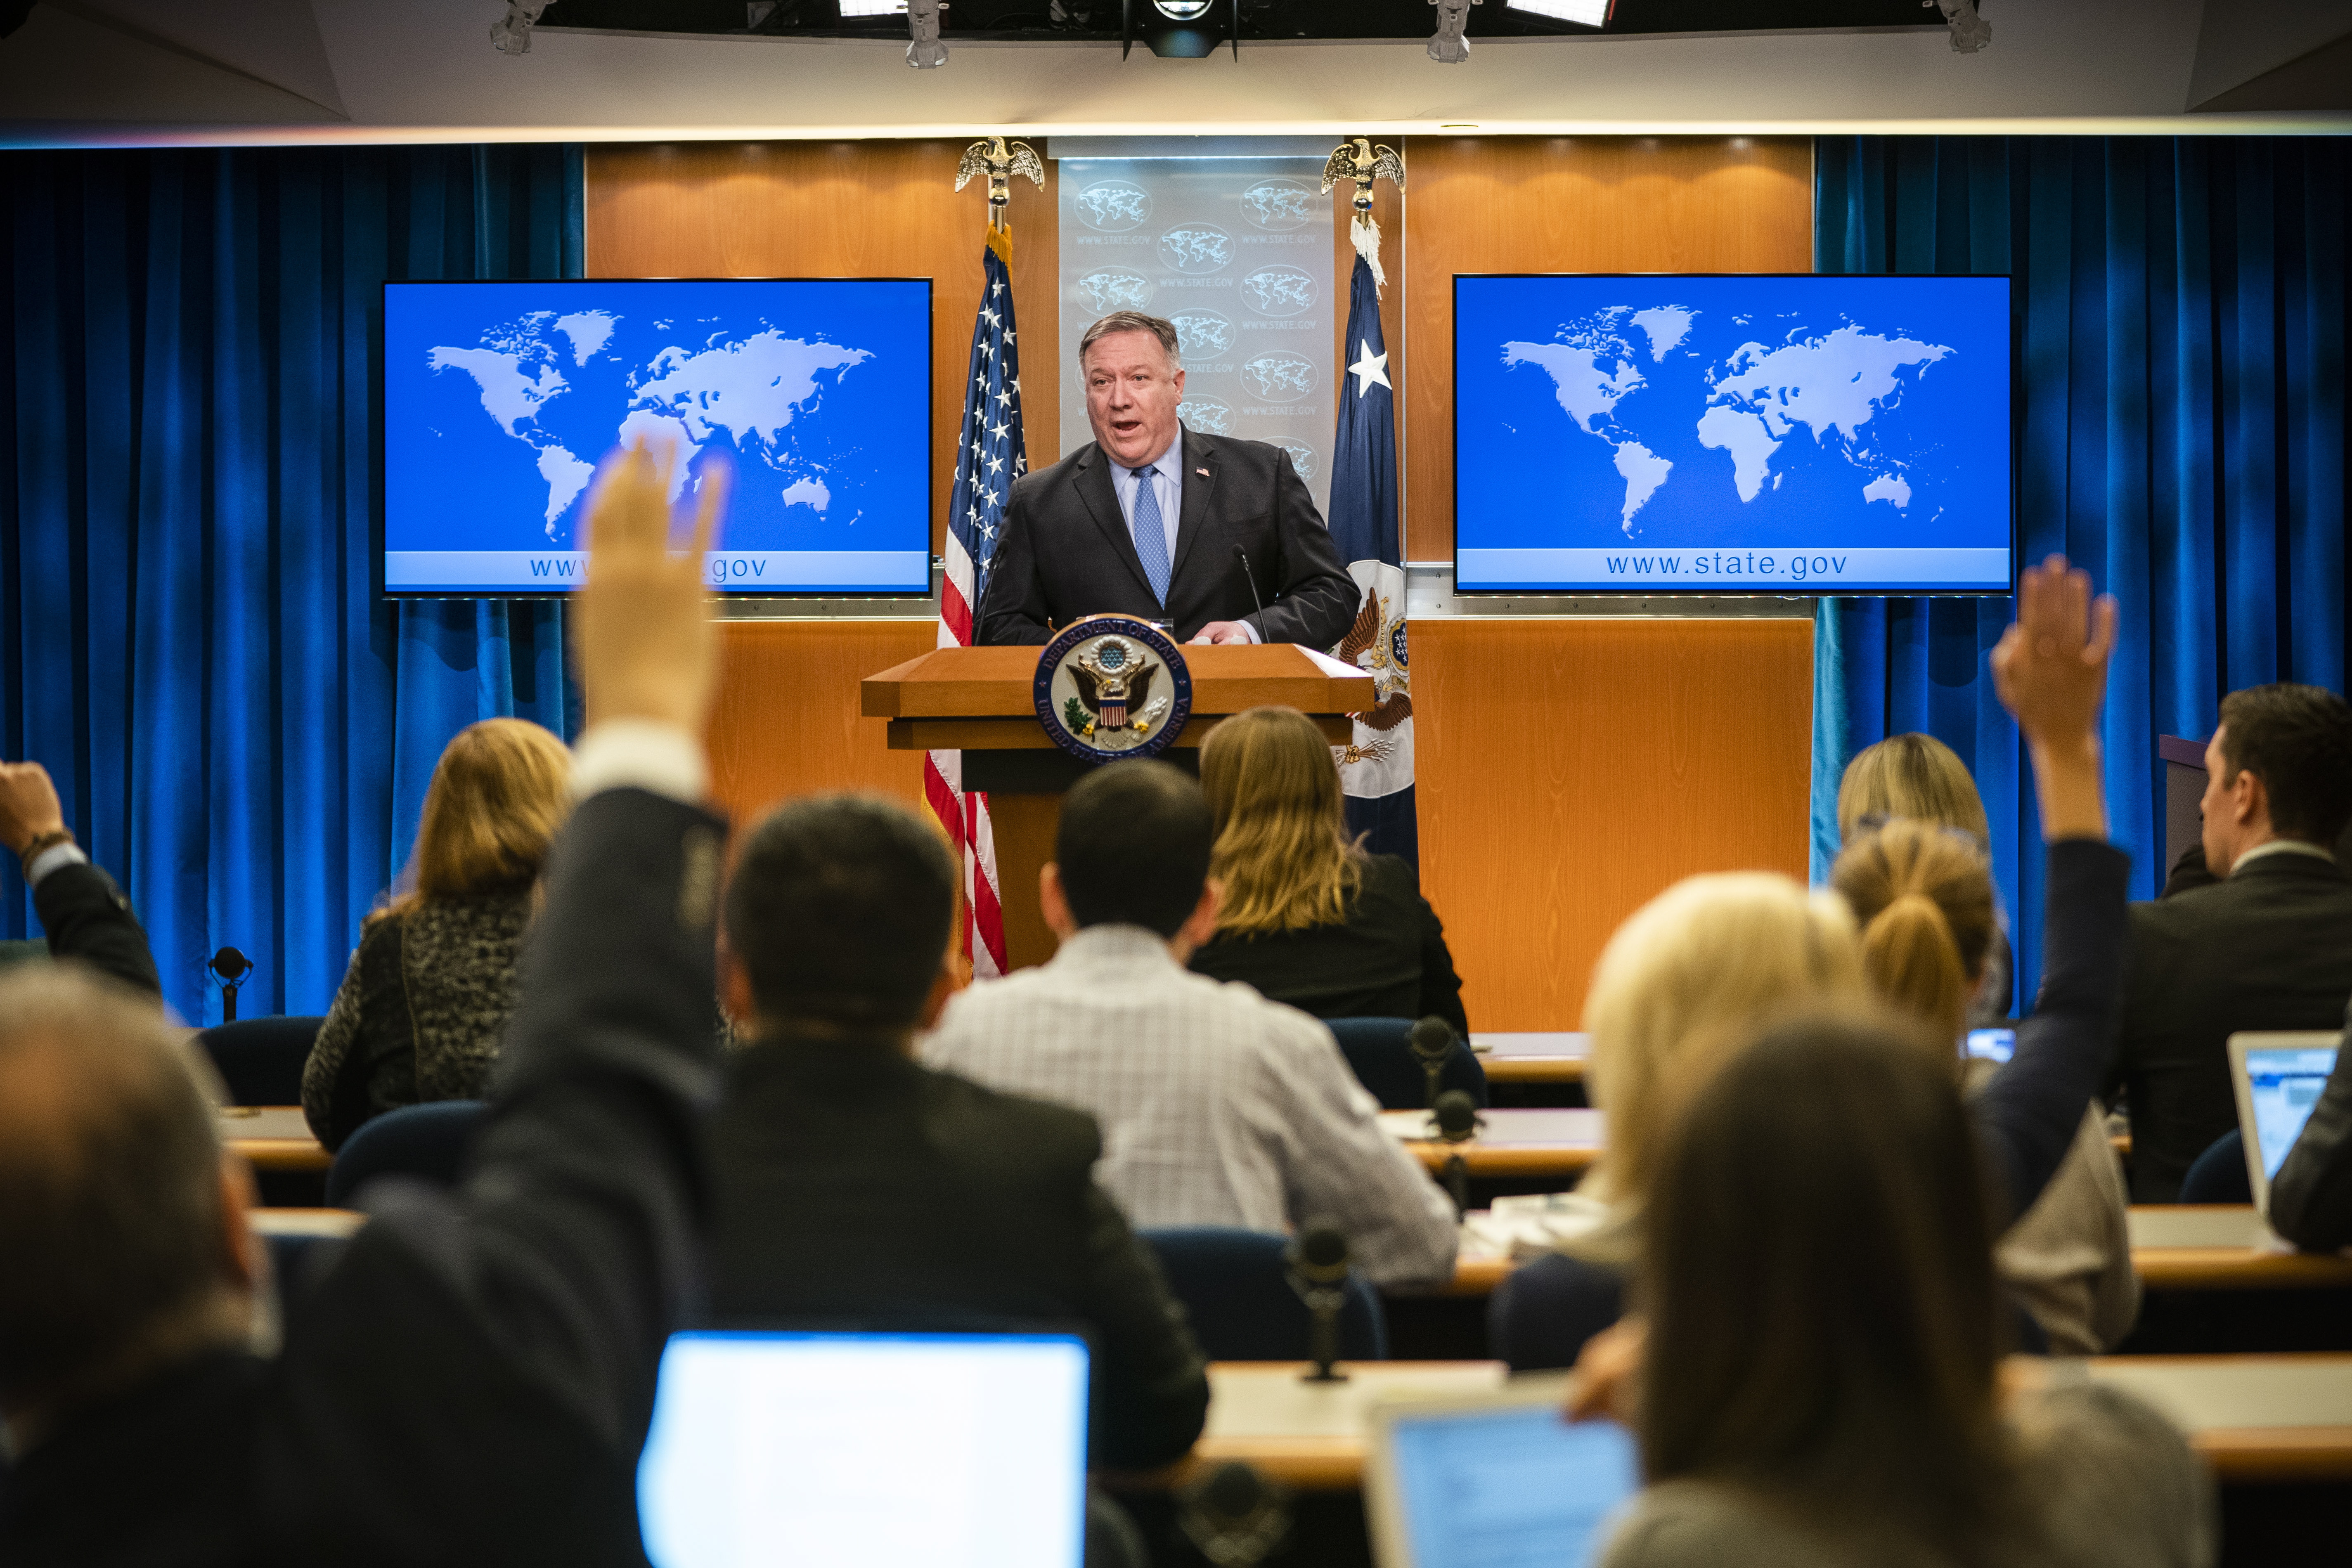 epa07180154 US Secretary of State Mike Pompeo speaks to the media about President Trump's support for the Crown Prince of Saudi Arabia despite that country's murder of journalist Jamal Khashoggi at the Department of State in Washington, DC, USA, 20 November 2018. The press conference comes as Turkey renews pressure on the Trump administration to extradite Fethullah Gulen, a Turkish cleric who lives in Pennsylvania. The White House is reportedly considering the move to ease pressure from Turkey over Khashoggi's murder.  EPA/JIM LO SCALZO